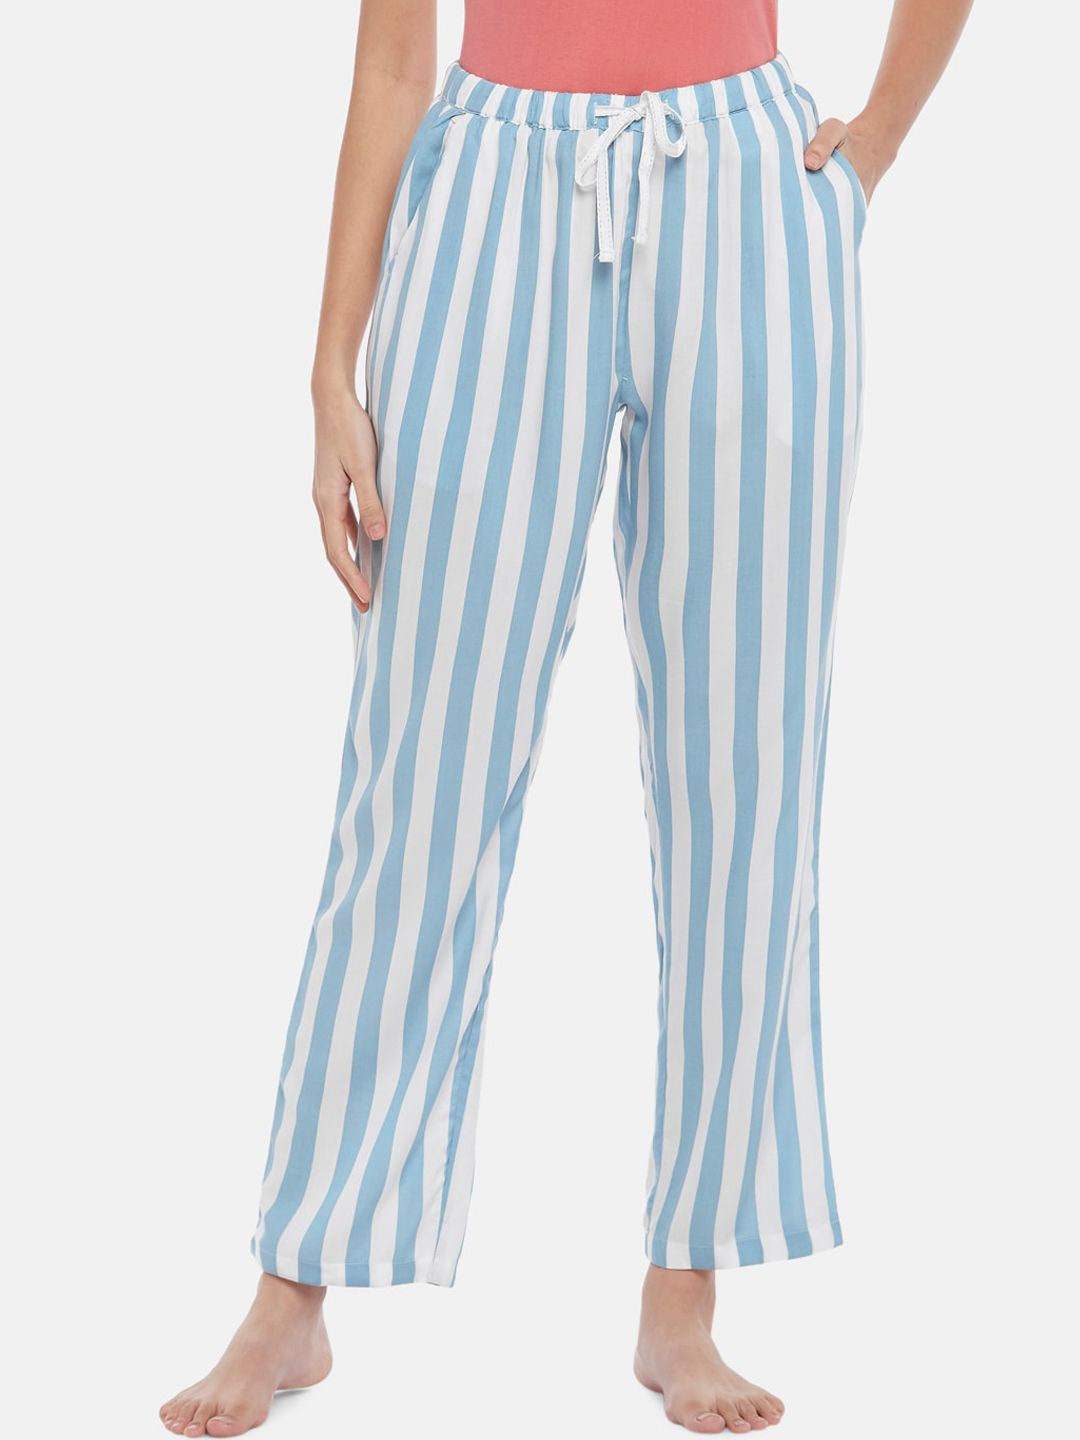 Dreamz by Pantaloons Women Blue & White Striped Lounge Pants Price in India